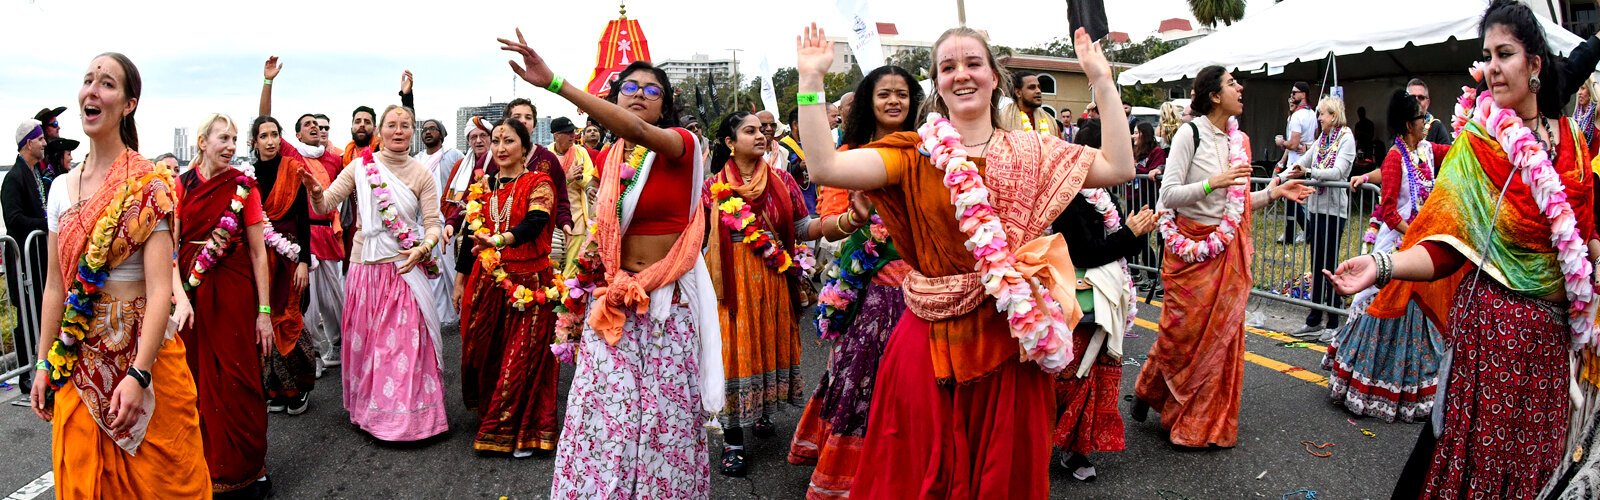 Chant, dance and be happy is the motto of the Festival of Chariots from India as they dance their way on the parade route during the 2023 Seminole Hard Rock Gasparilla Pirate Fest in Tampa.